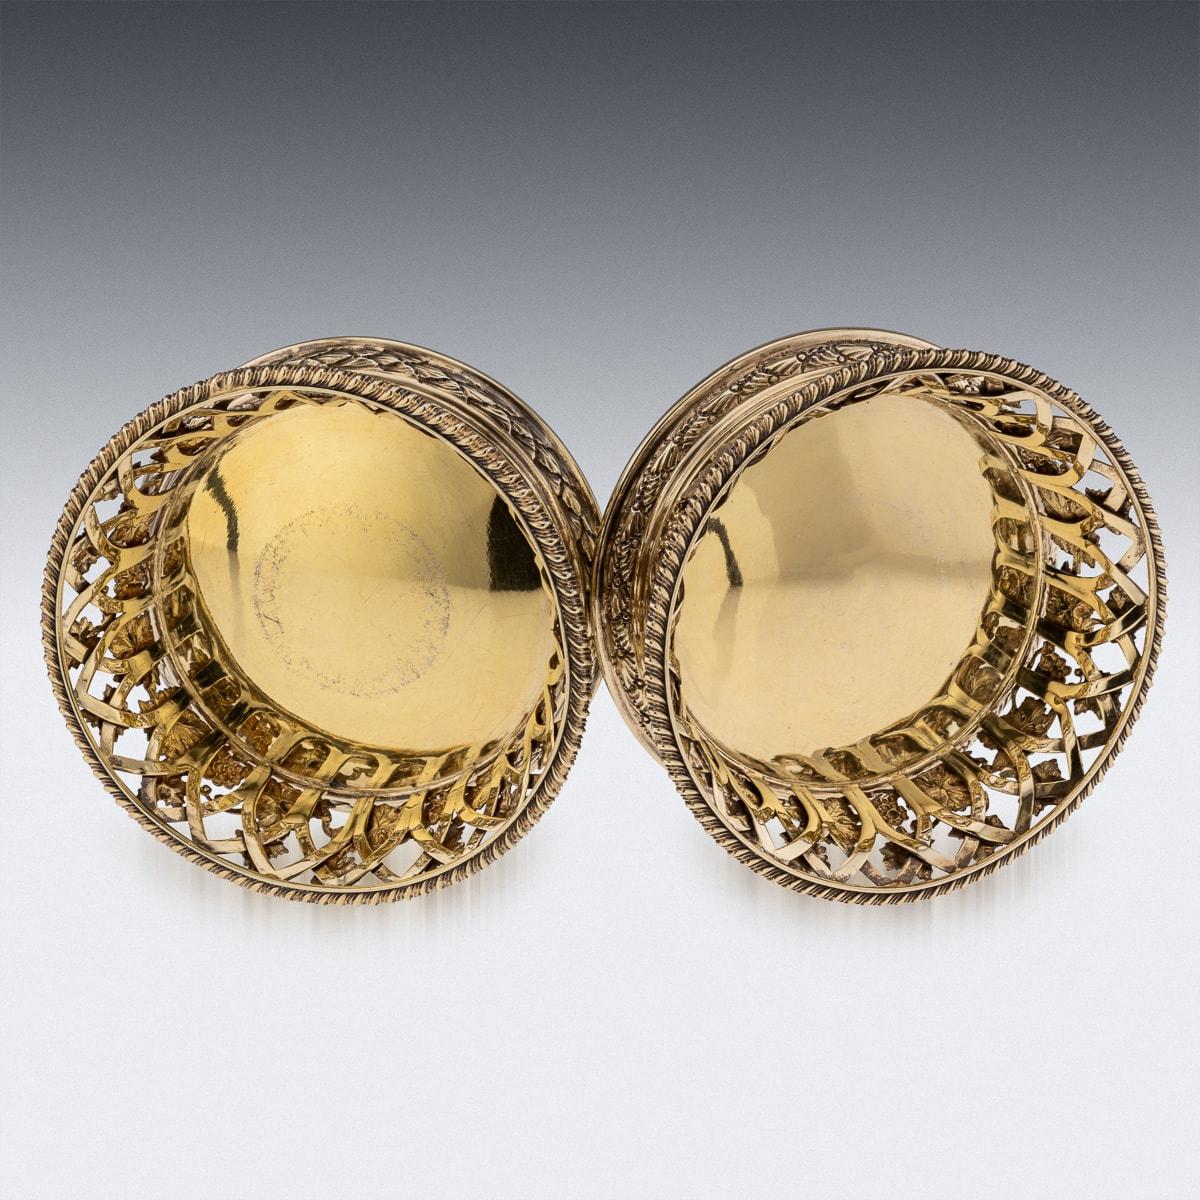 Antique 20th Century Edwardian Silver Gilt Pair Of Wine Coasters, London c.1904 For Sale 3